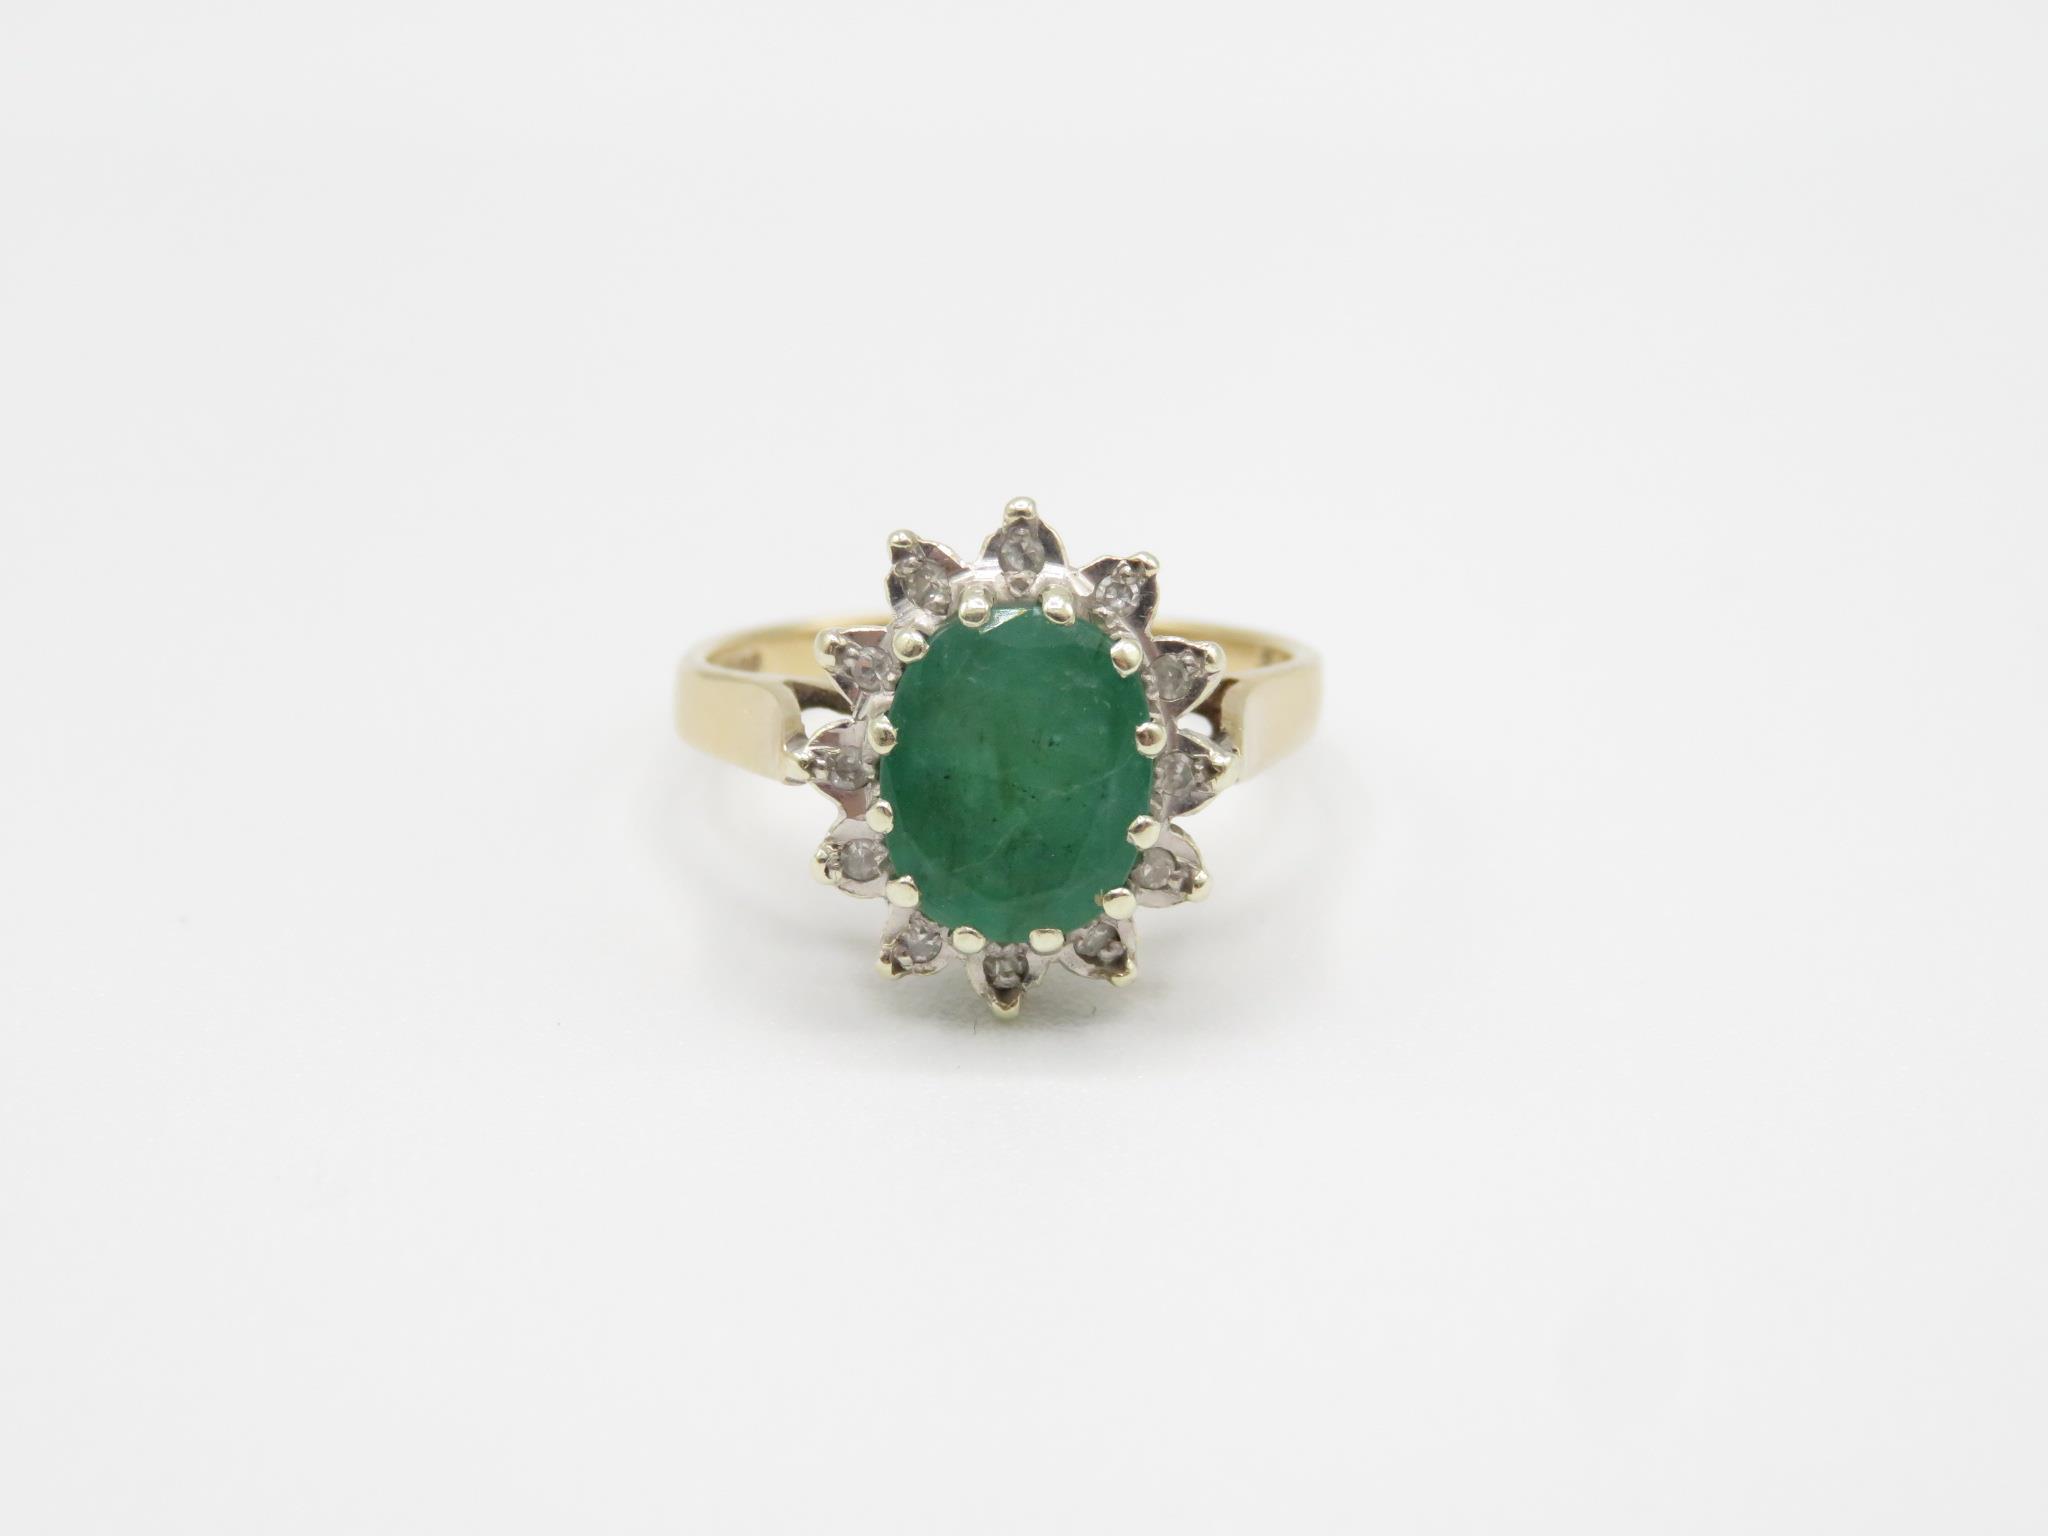 9ct Gold Oval Cut Emerald Single Stone Ring With Diamond Surround (3.2g) Size M - Image 3 of 8